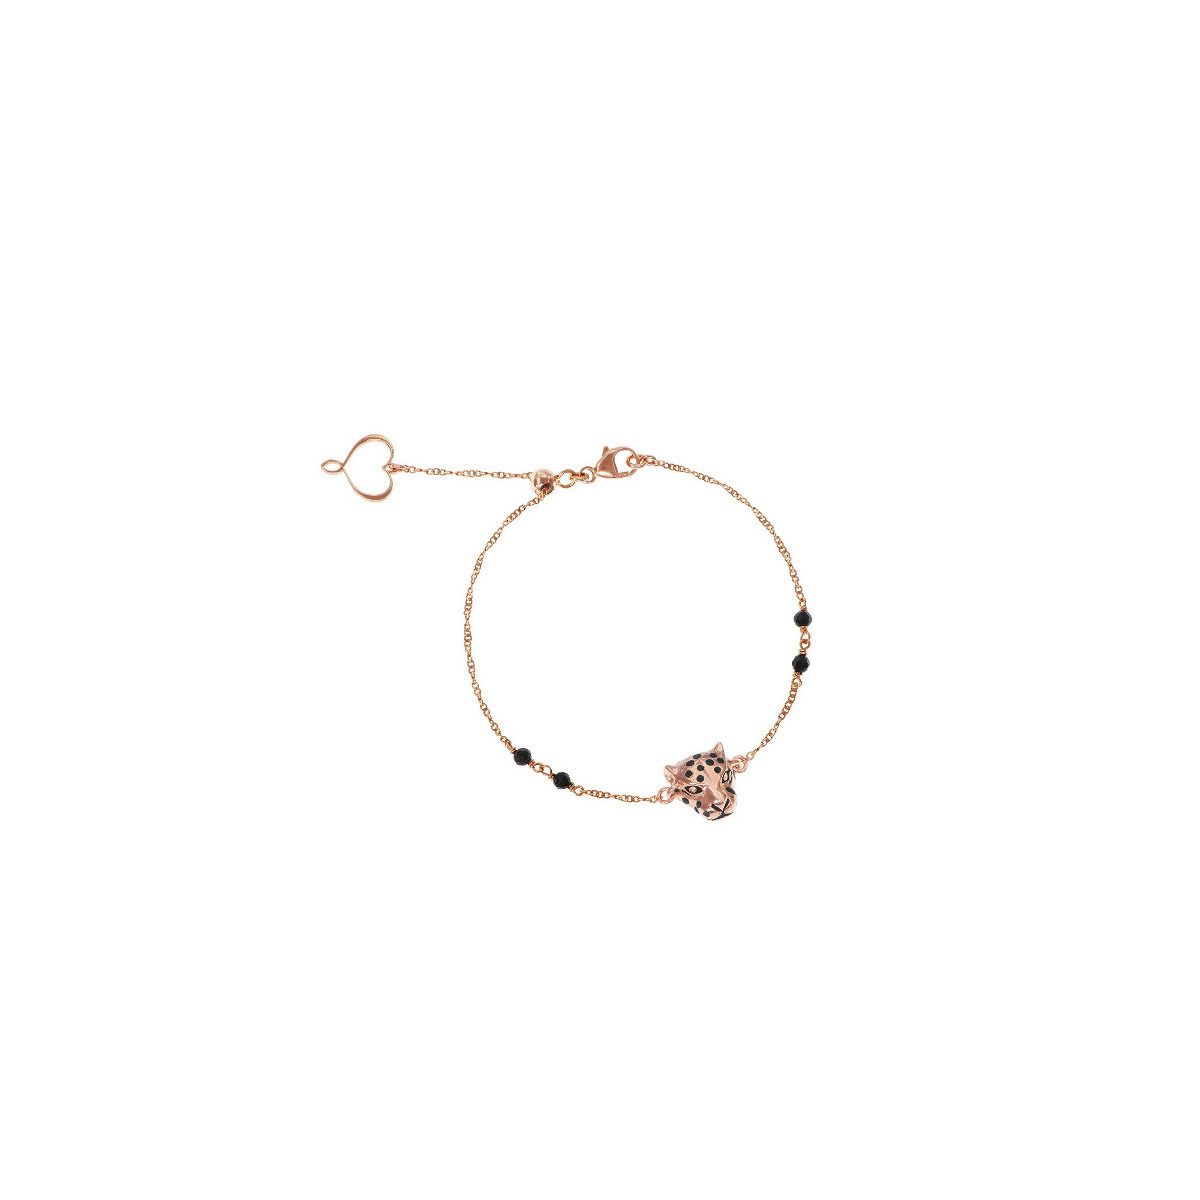 THIN CHAIN BRACELET WITH ROSE GOLD-PLATED LEOPARD AND SPINEL STONES